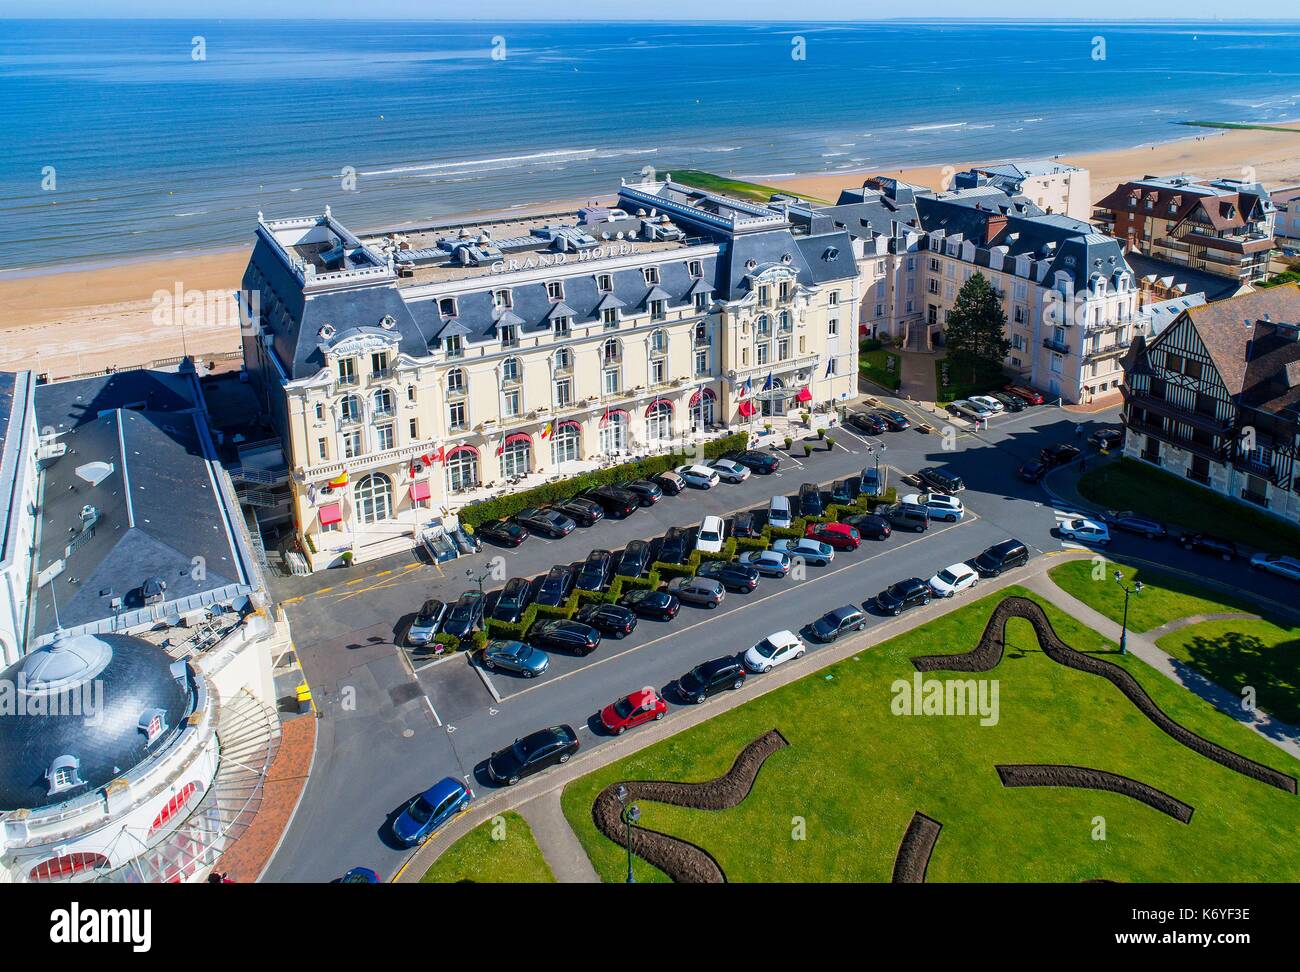 France, Calvados, Pays d'Auge, the cote Fleurie (Flowered coast), Cabourg, the seaside promenade and the Grand Hotel (aerial view) Stock Photo